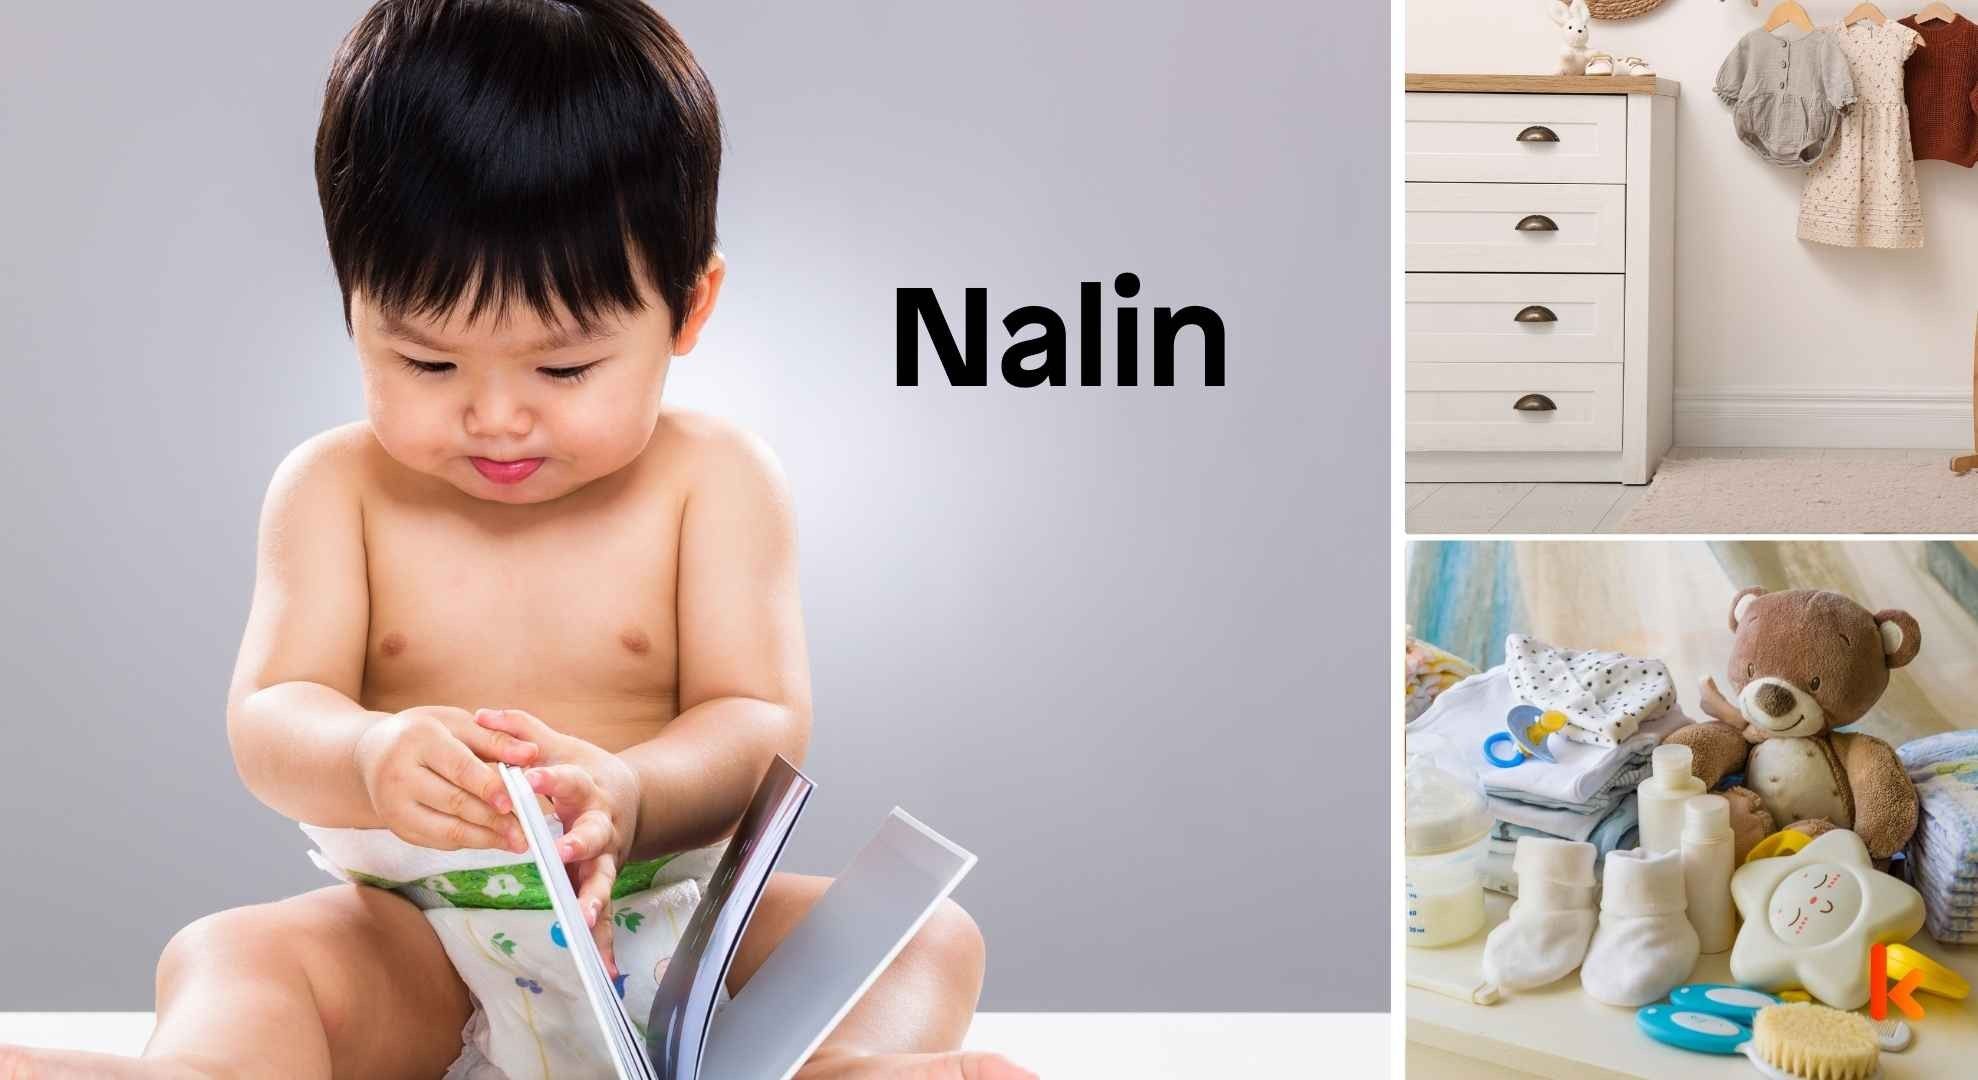 Meaning of the name Nalin